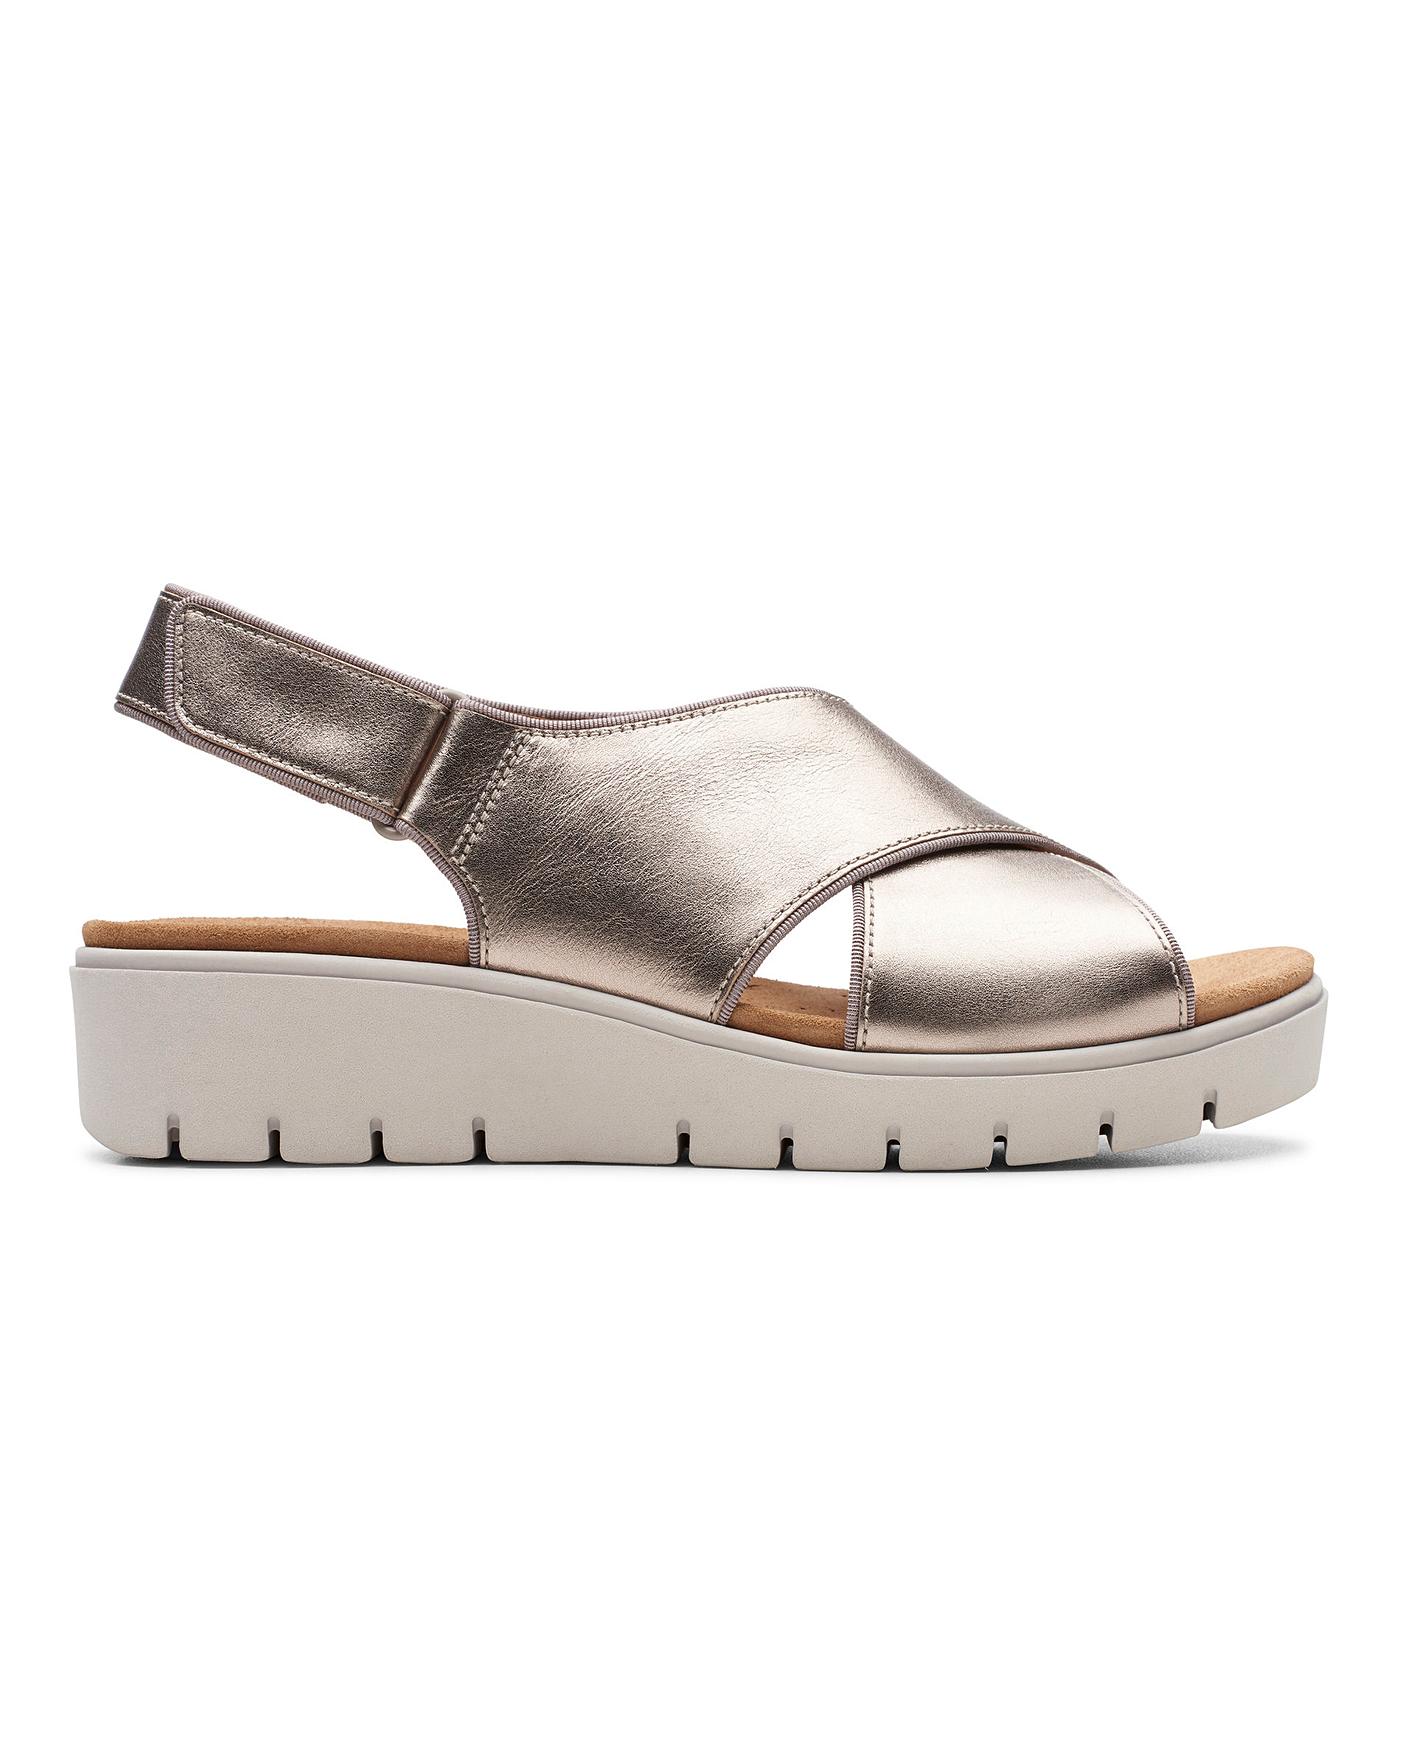 Clarks Slingback Sandals E Fit | Simply Be